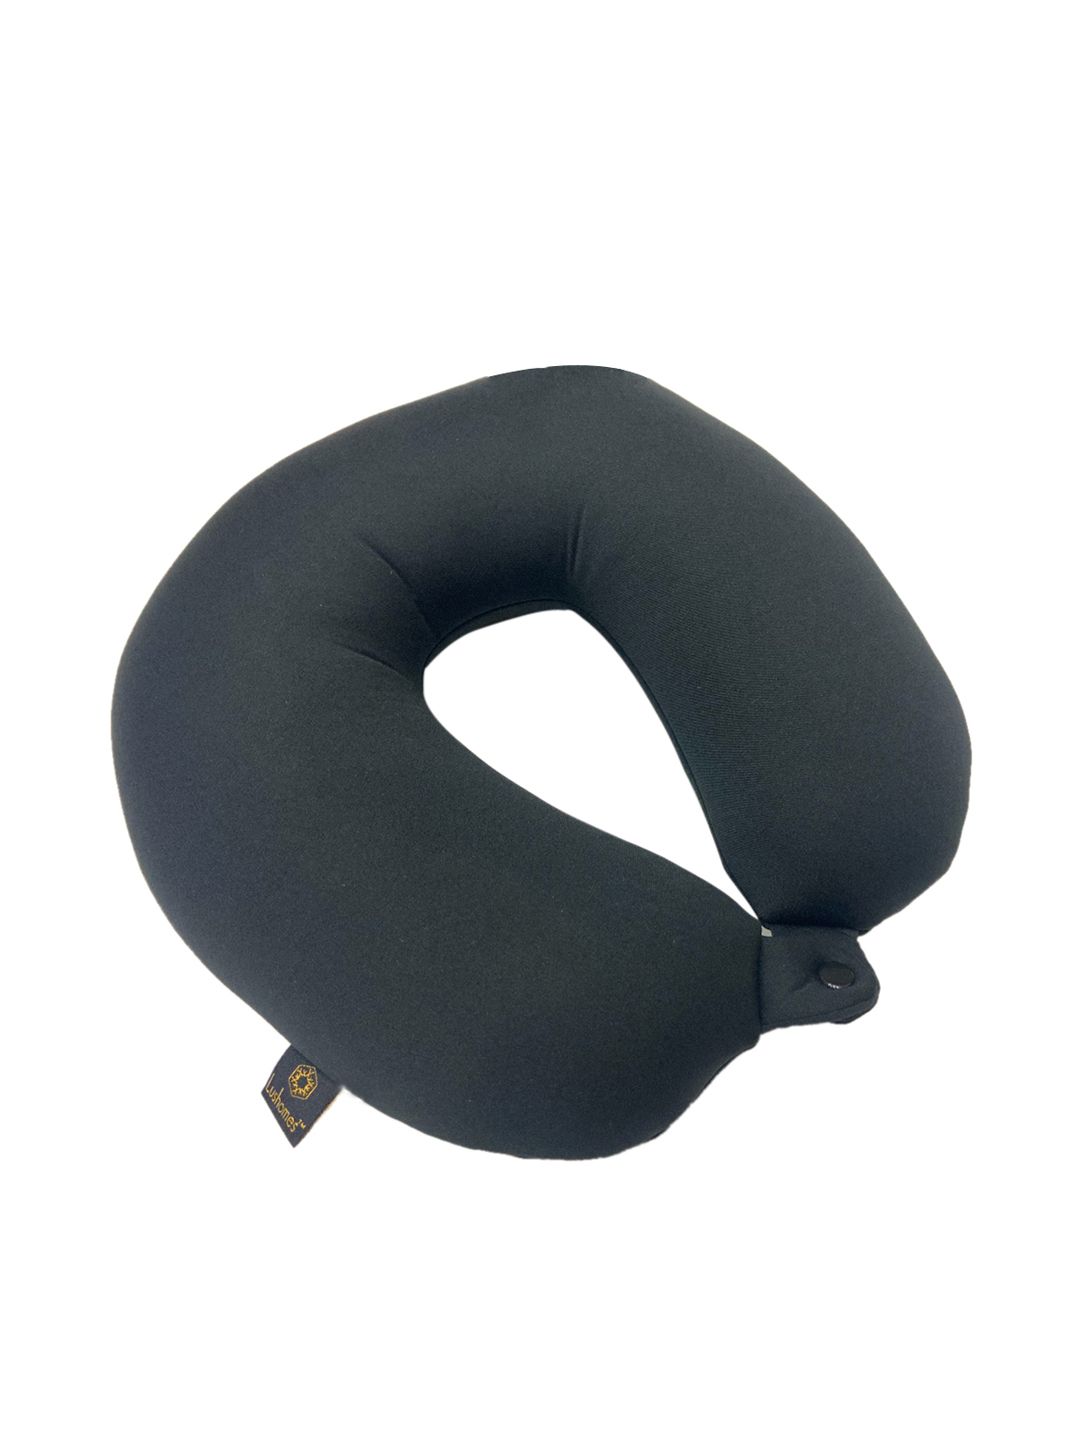 Lushomes Black Solid U-Shaped Memory Foam Travel Neck Pillow Price in India